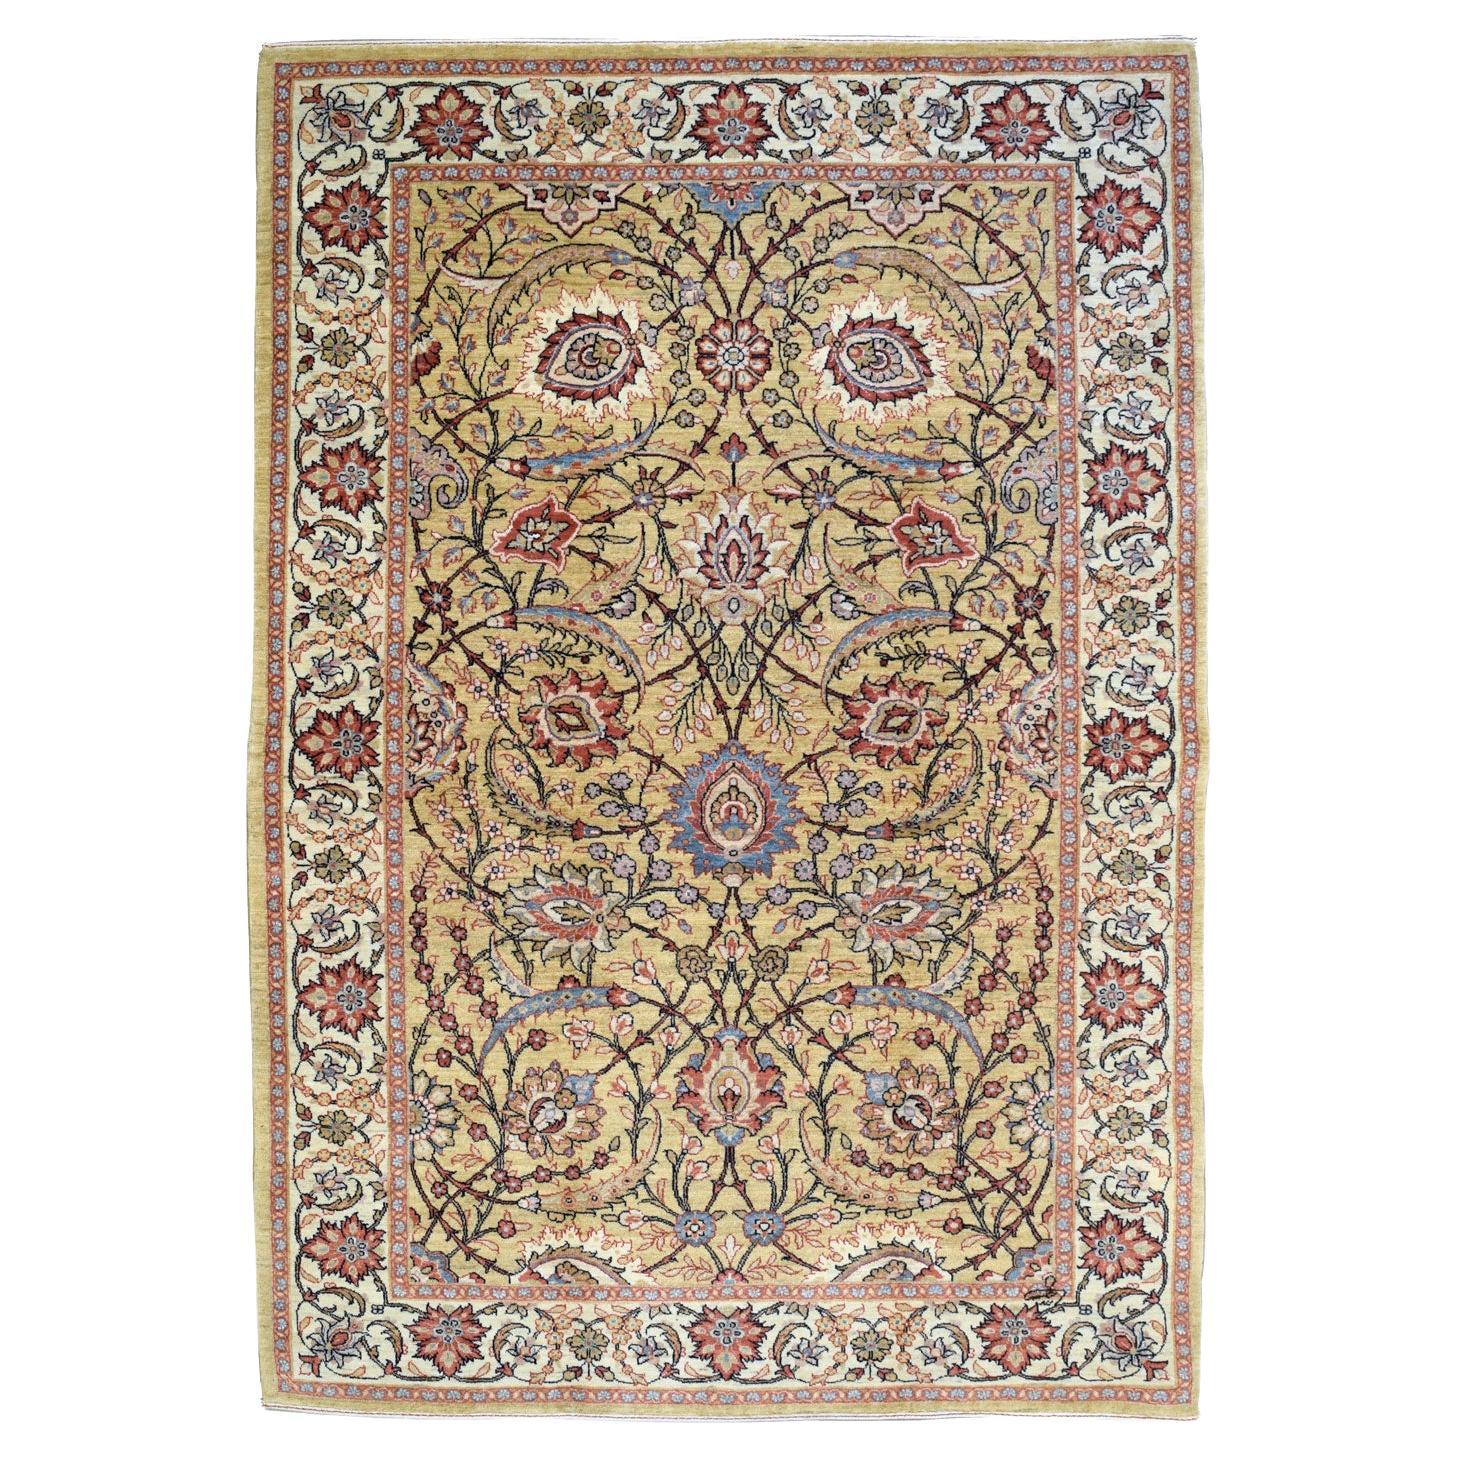 Pure Wool Mohtasham Persian Carpet, Cream, Red, and Blue, 5' x 7' For Sale